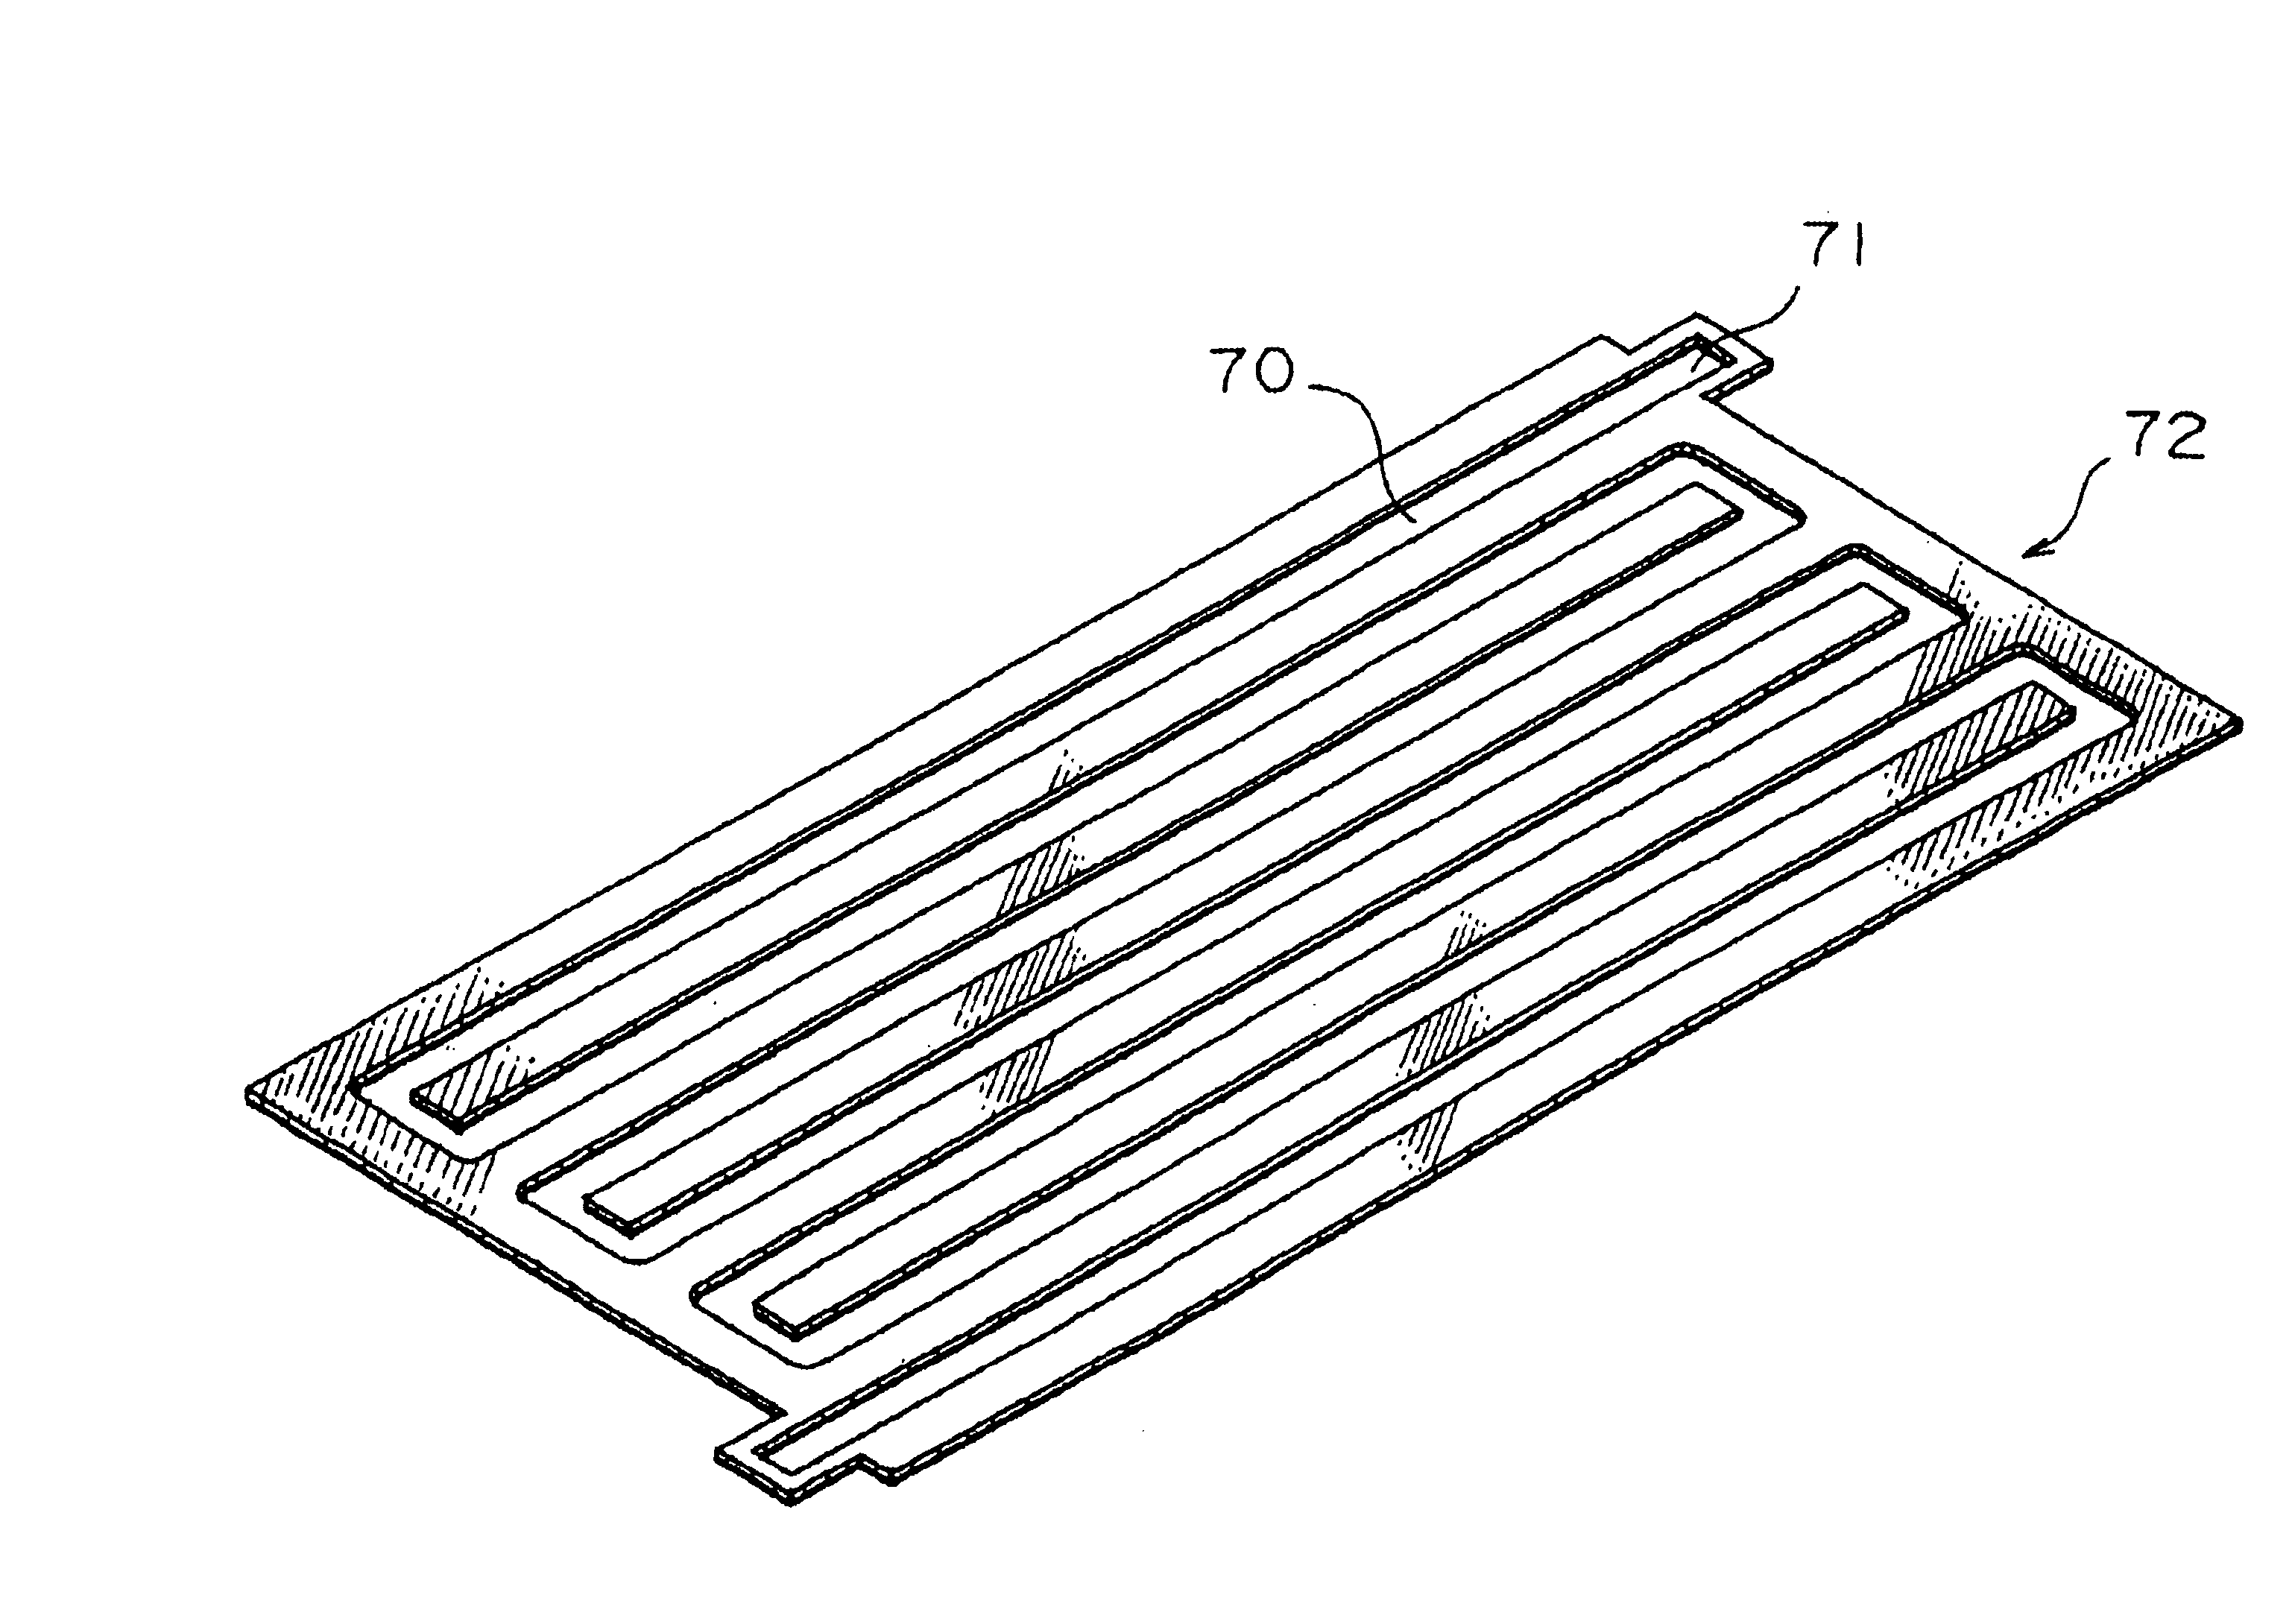 Fuel cell stack with separator of a laminate structure